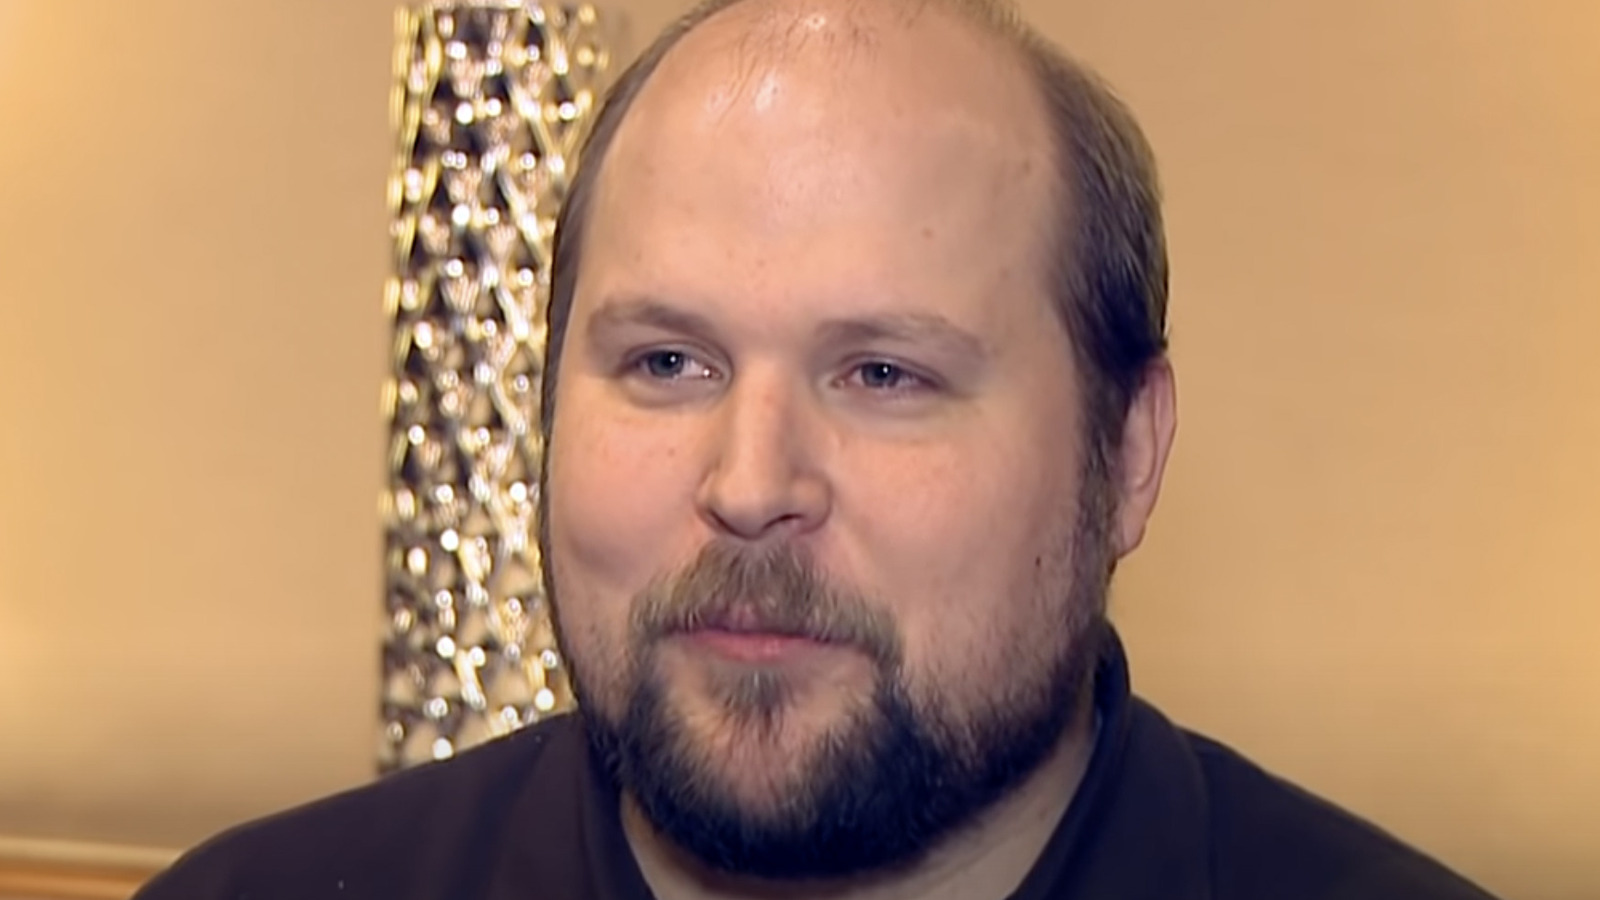 markus persson